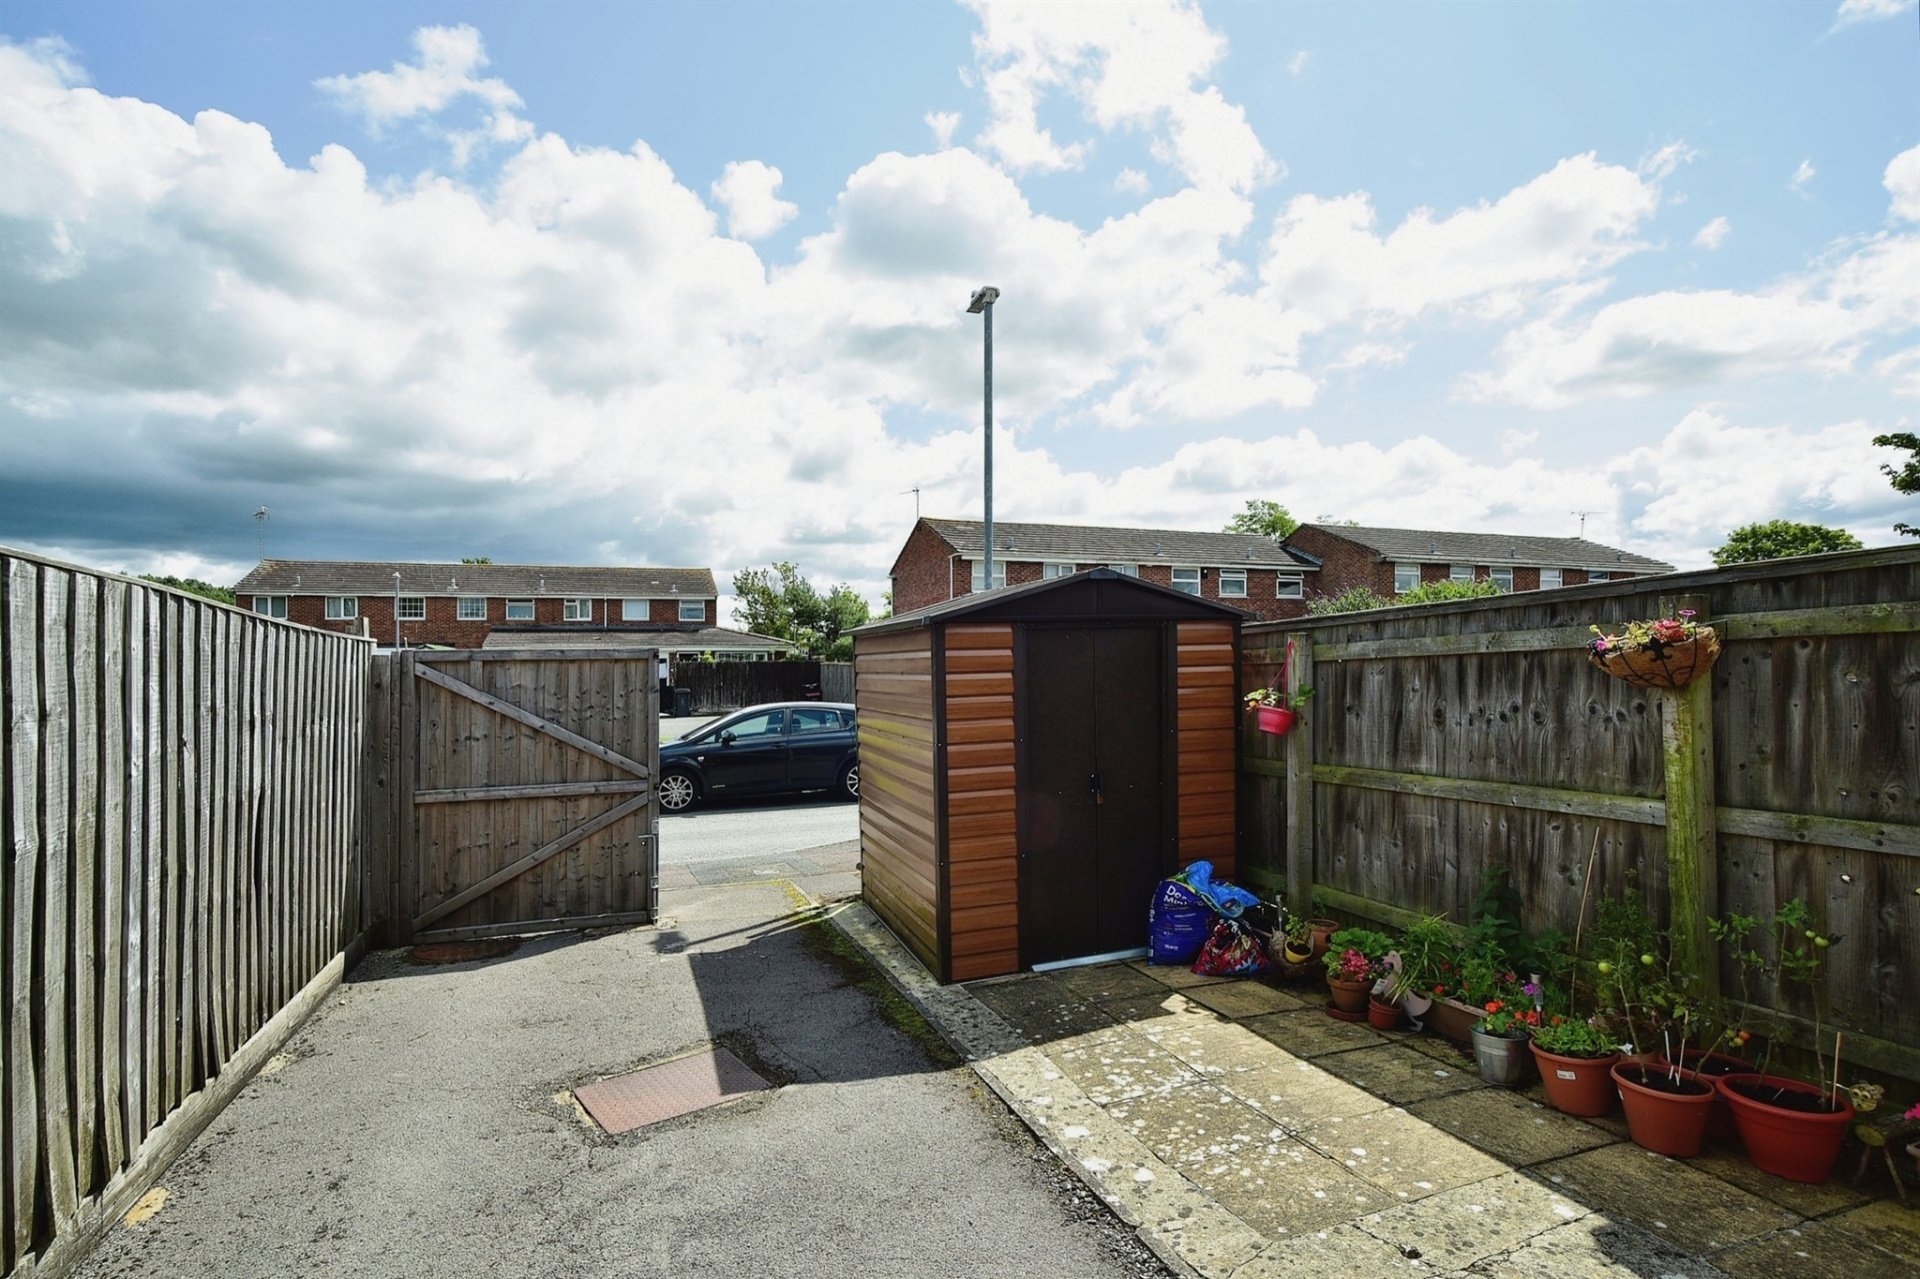 Back garden gate with a shed and space for parking a car